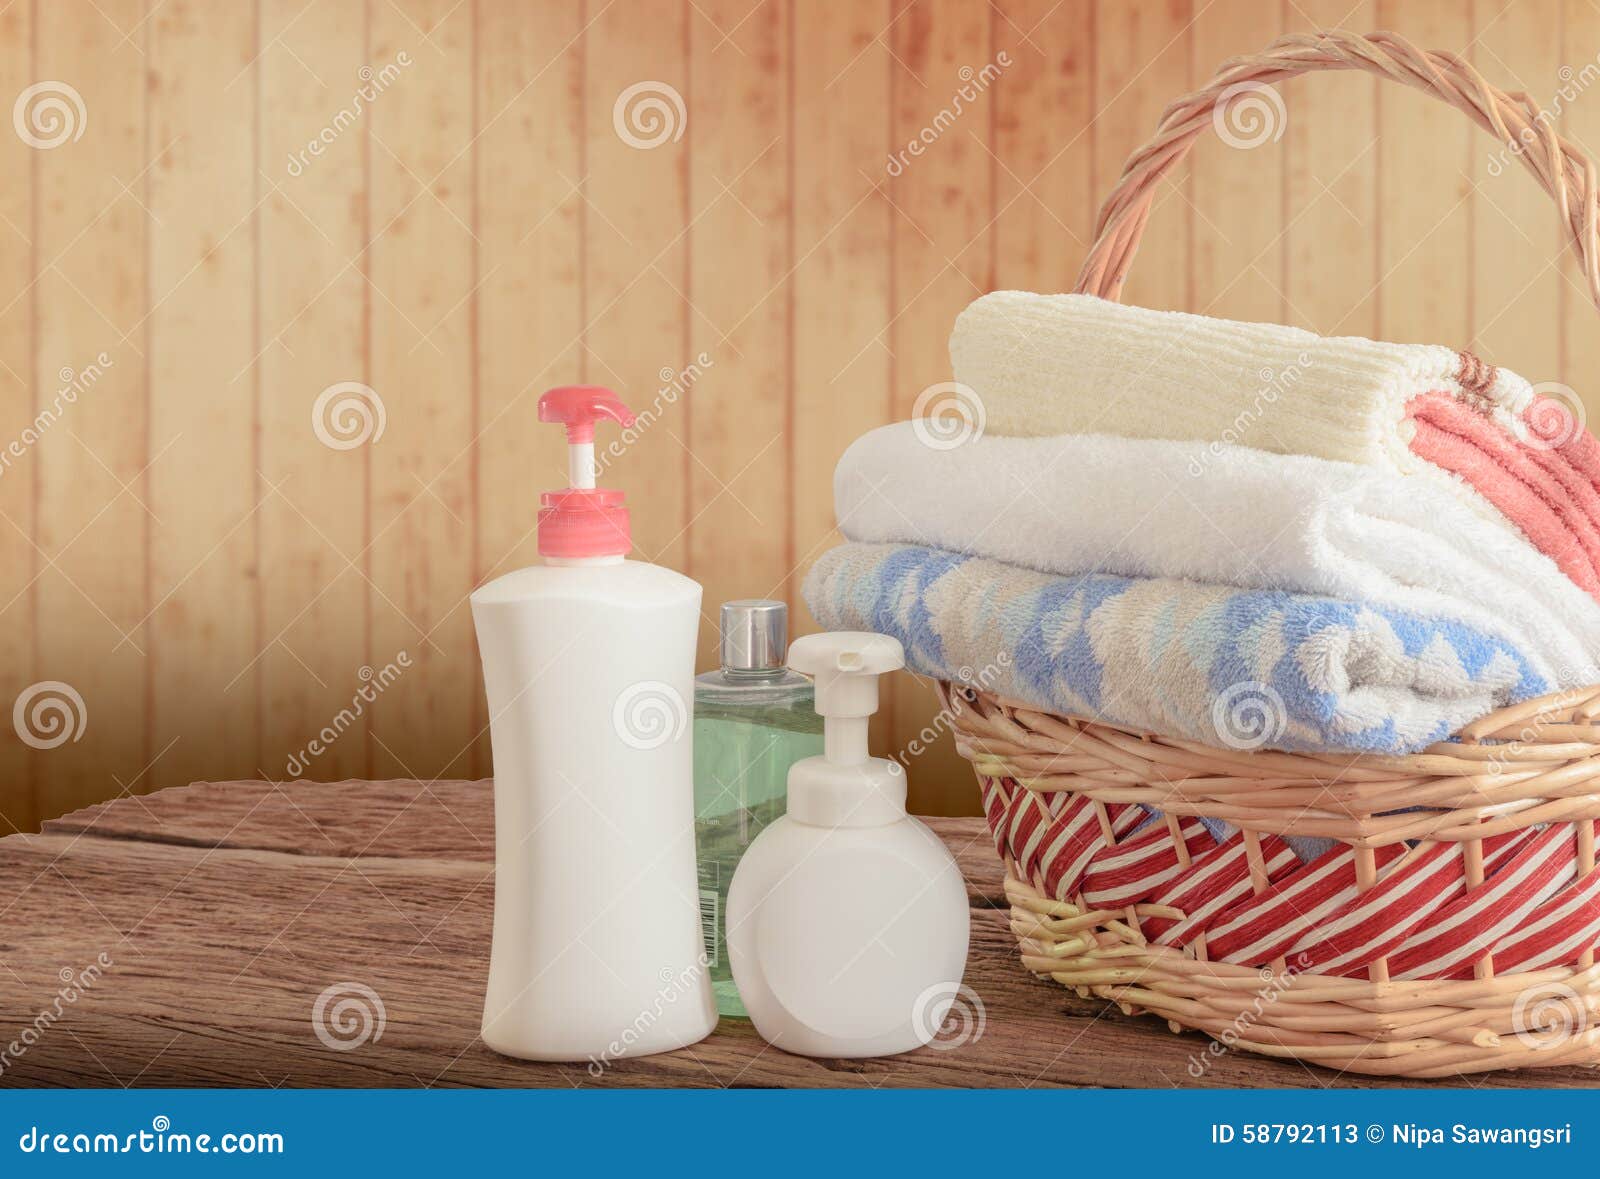 Shower Gel with Skin Cream and Bath Towels in Basket Stock Image ...